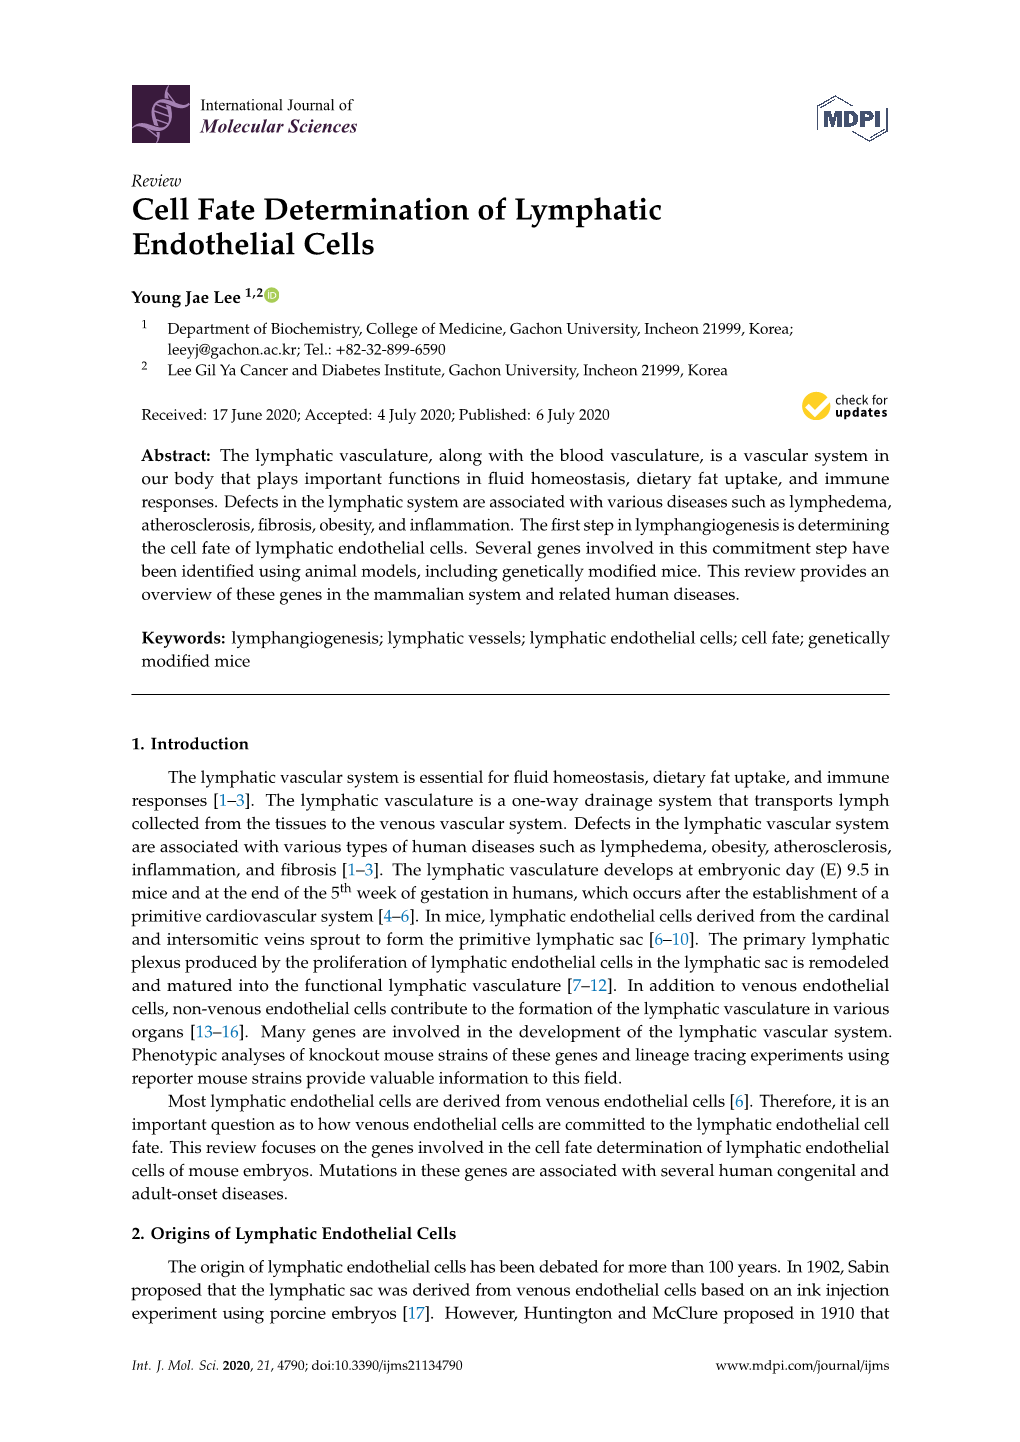 Cell Fate Determination of Lymphatic Endothelial Cells